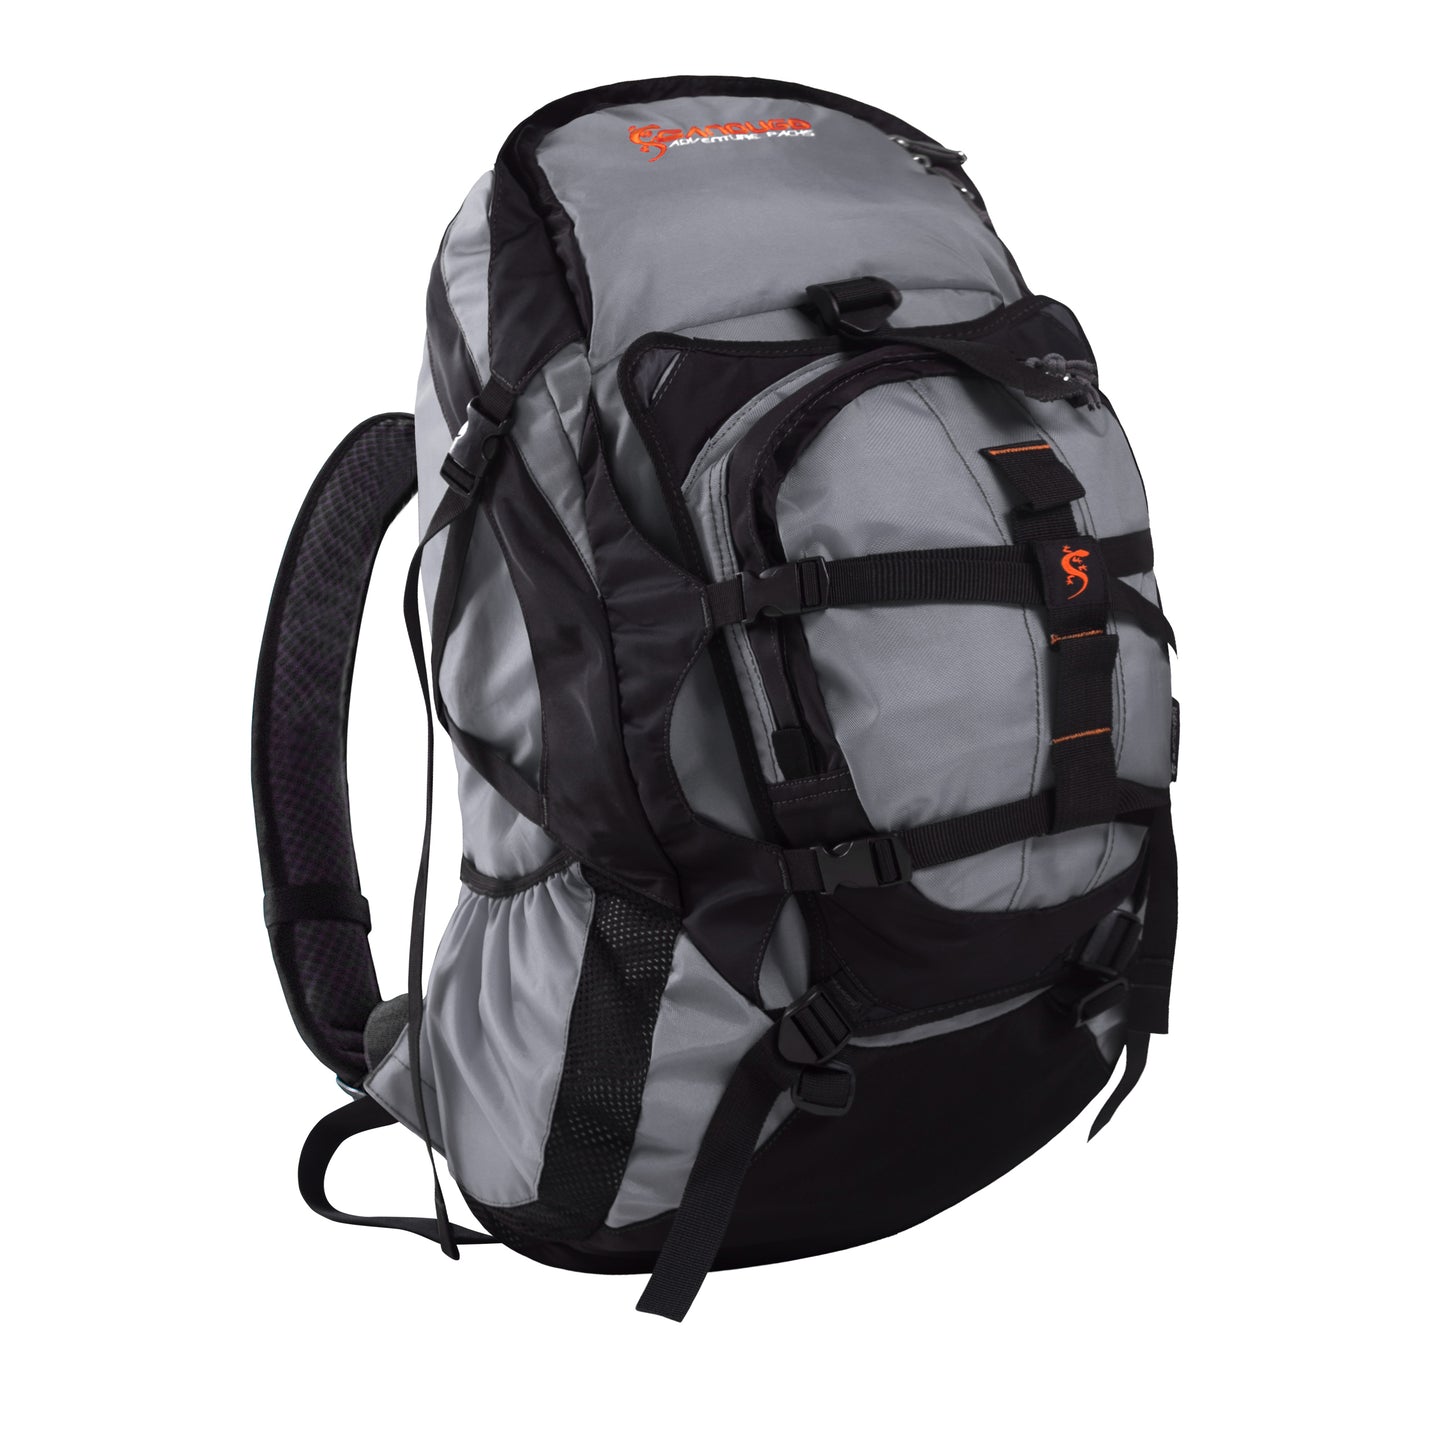 Sandugo Ascent 40L Backpack With Assault Pack & Rain Cover